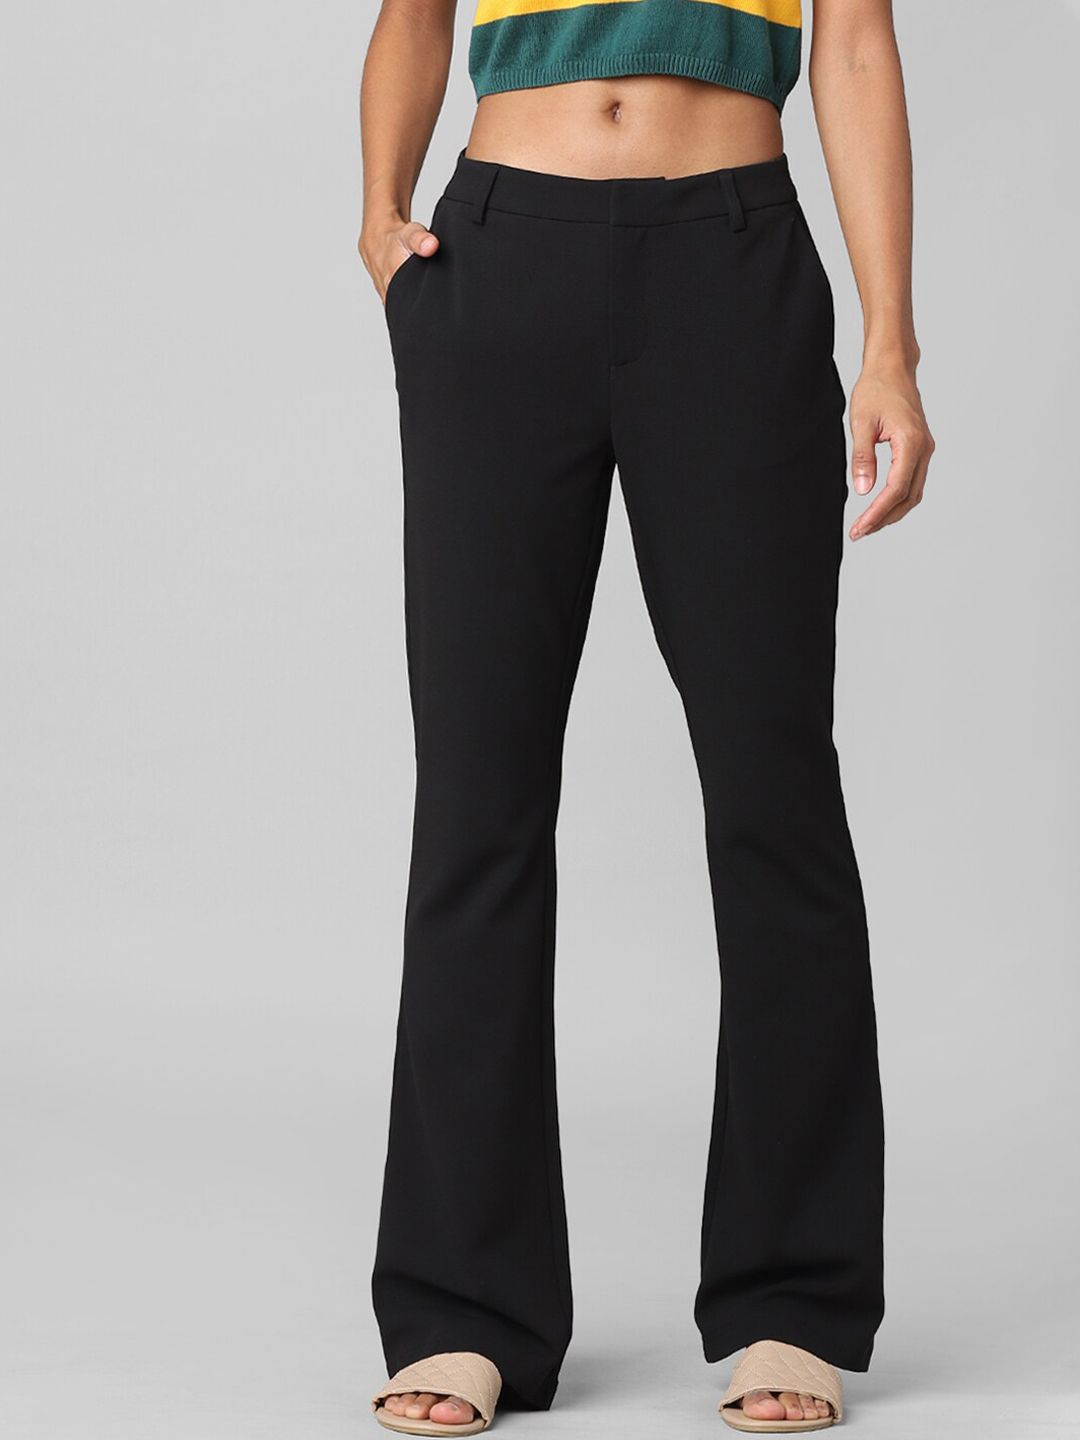 ONLY Women Black Flared High-Rise Bootcut Trousers Price in India